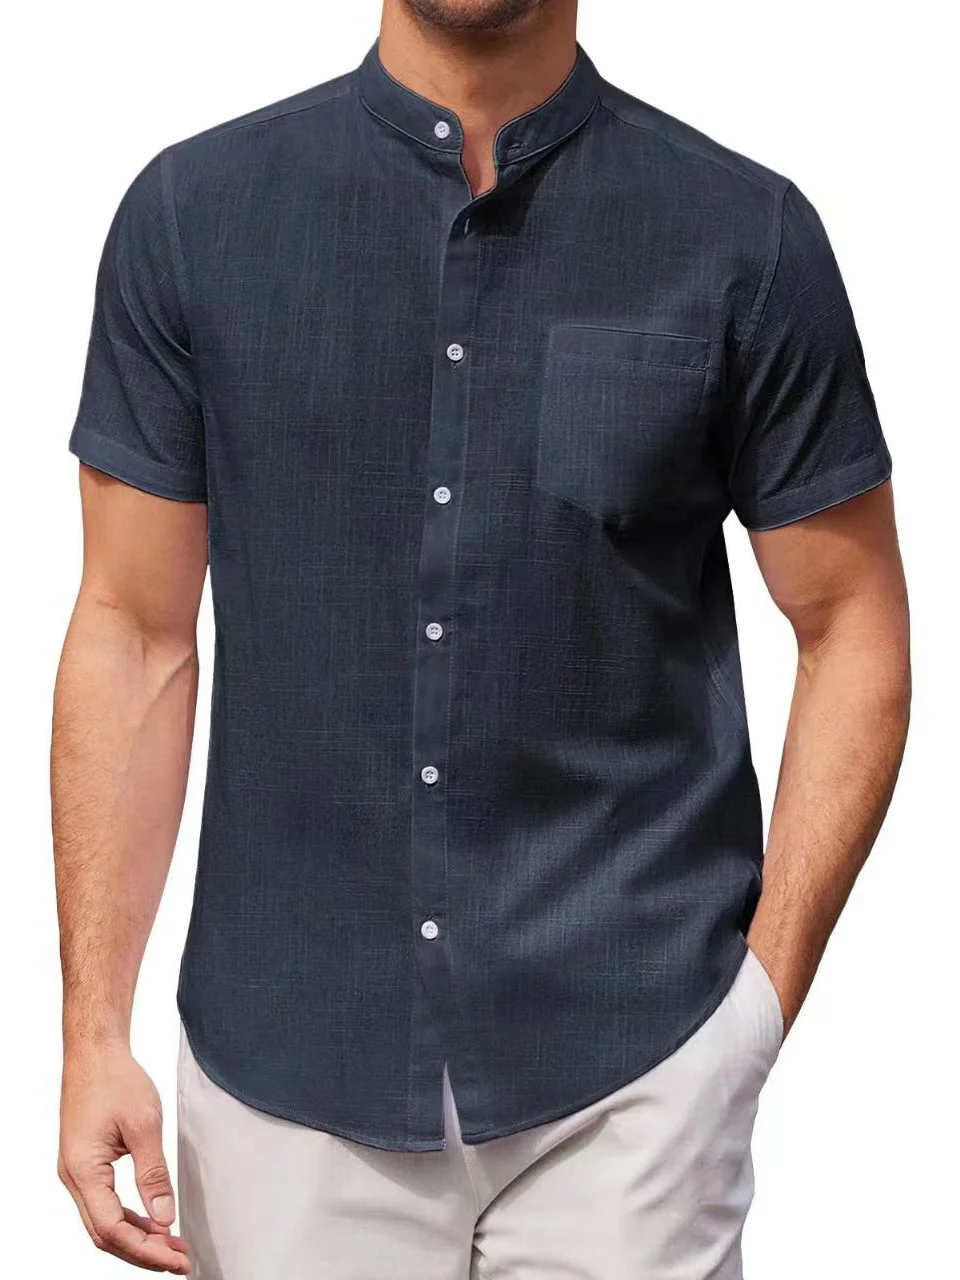 Men's Daily Casual Simple Plain Short Sleeve Shirt With Pockets